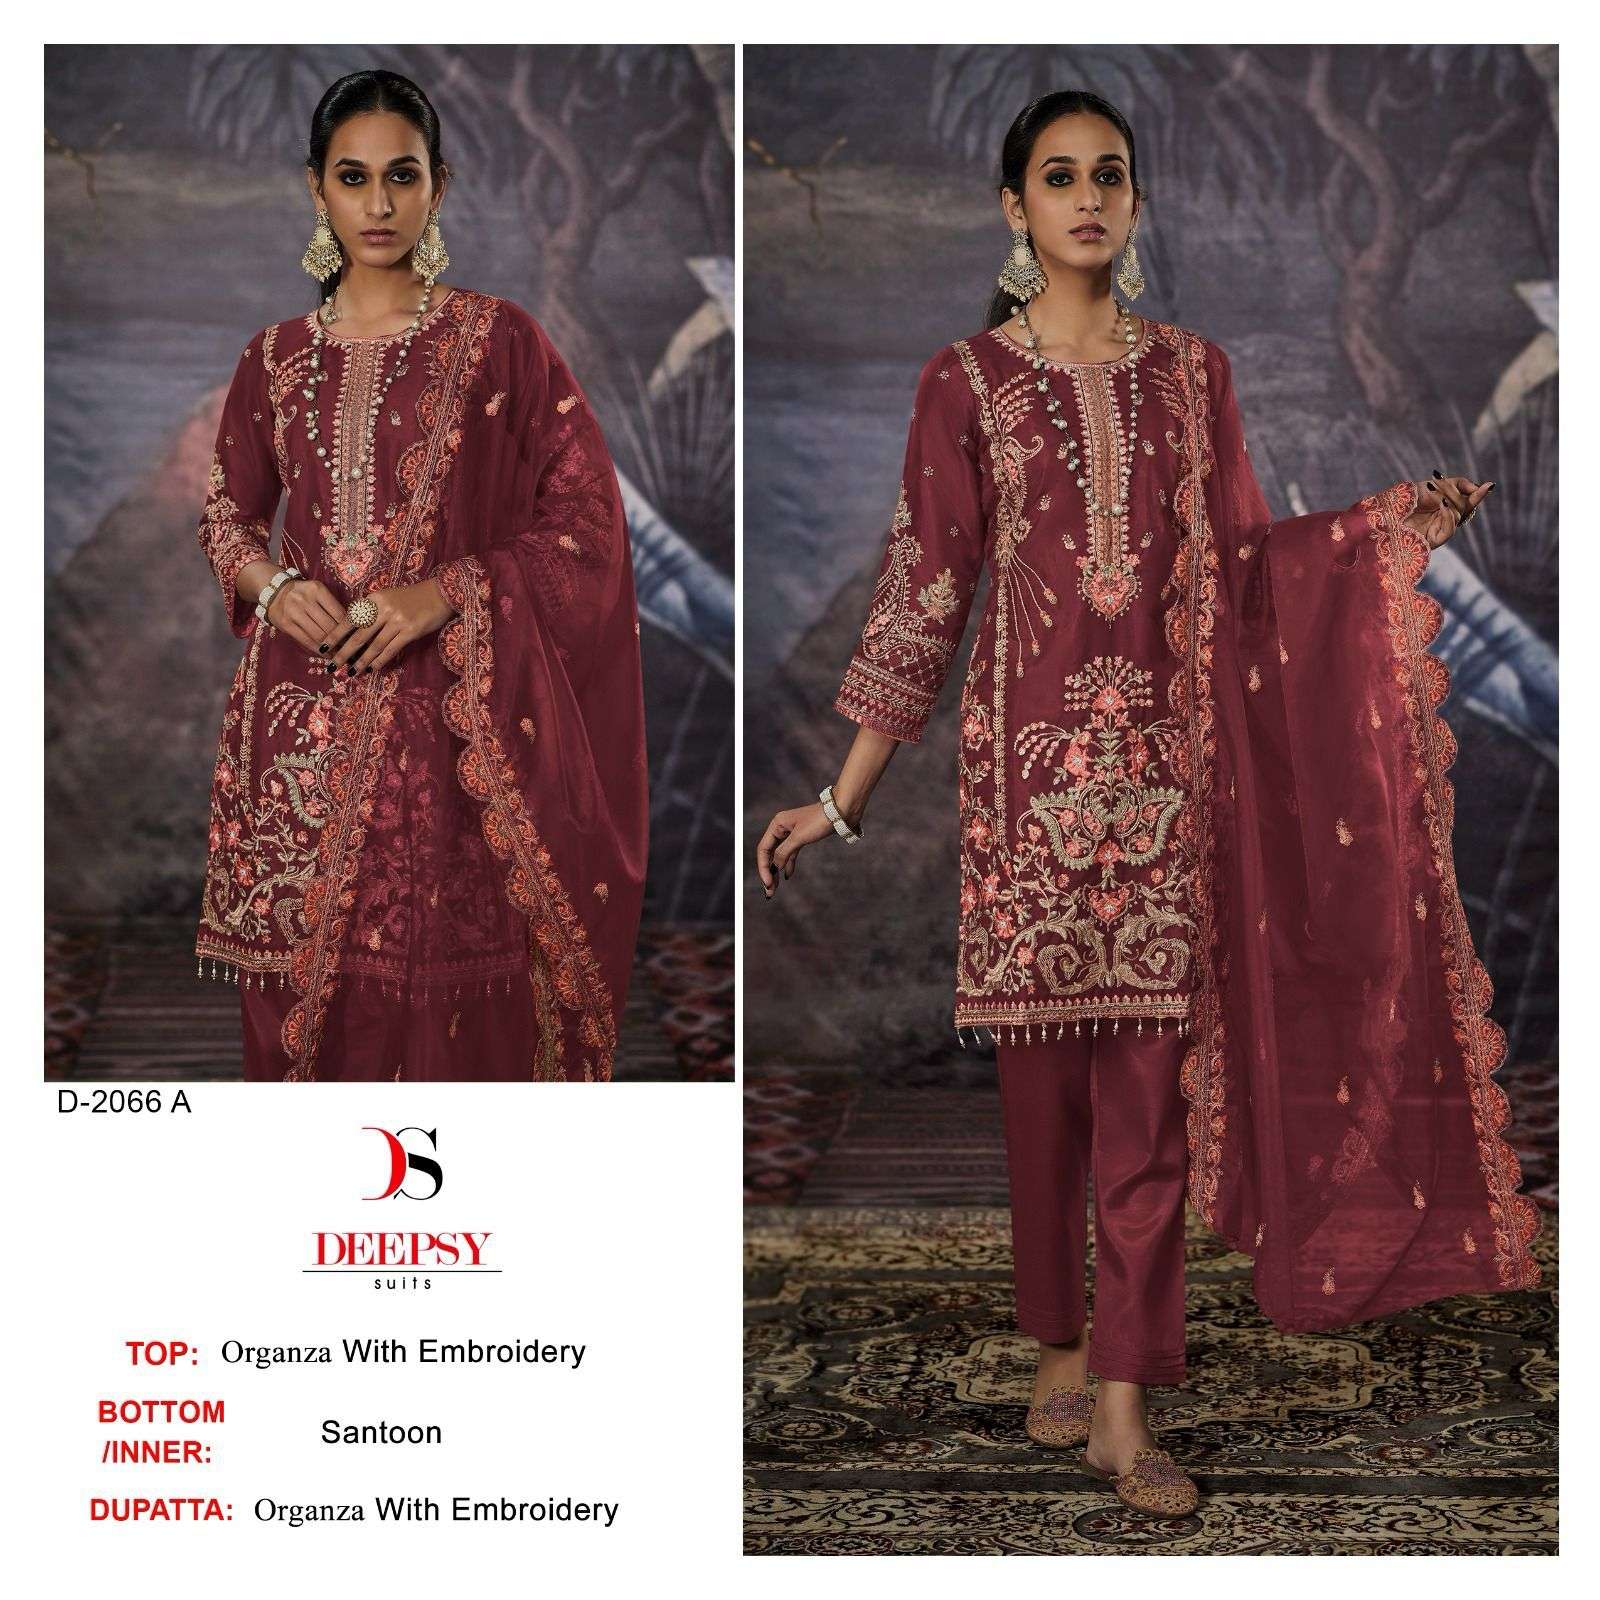 Deepsy Suits D 2066 Organza With Embroidery work Pakistani s...